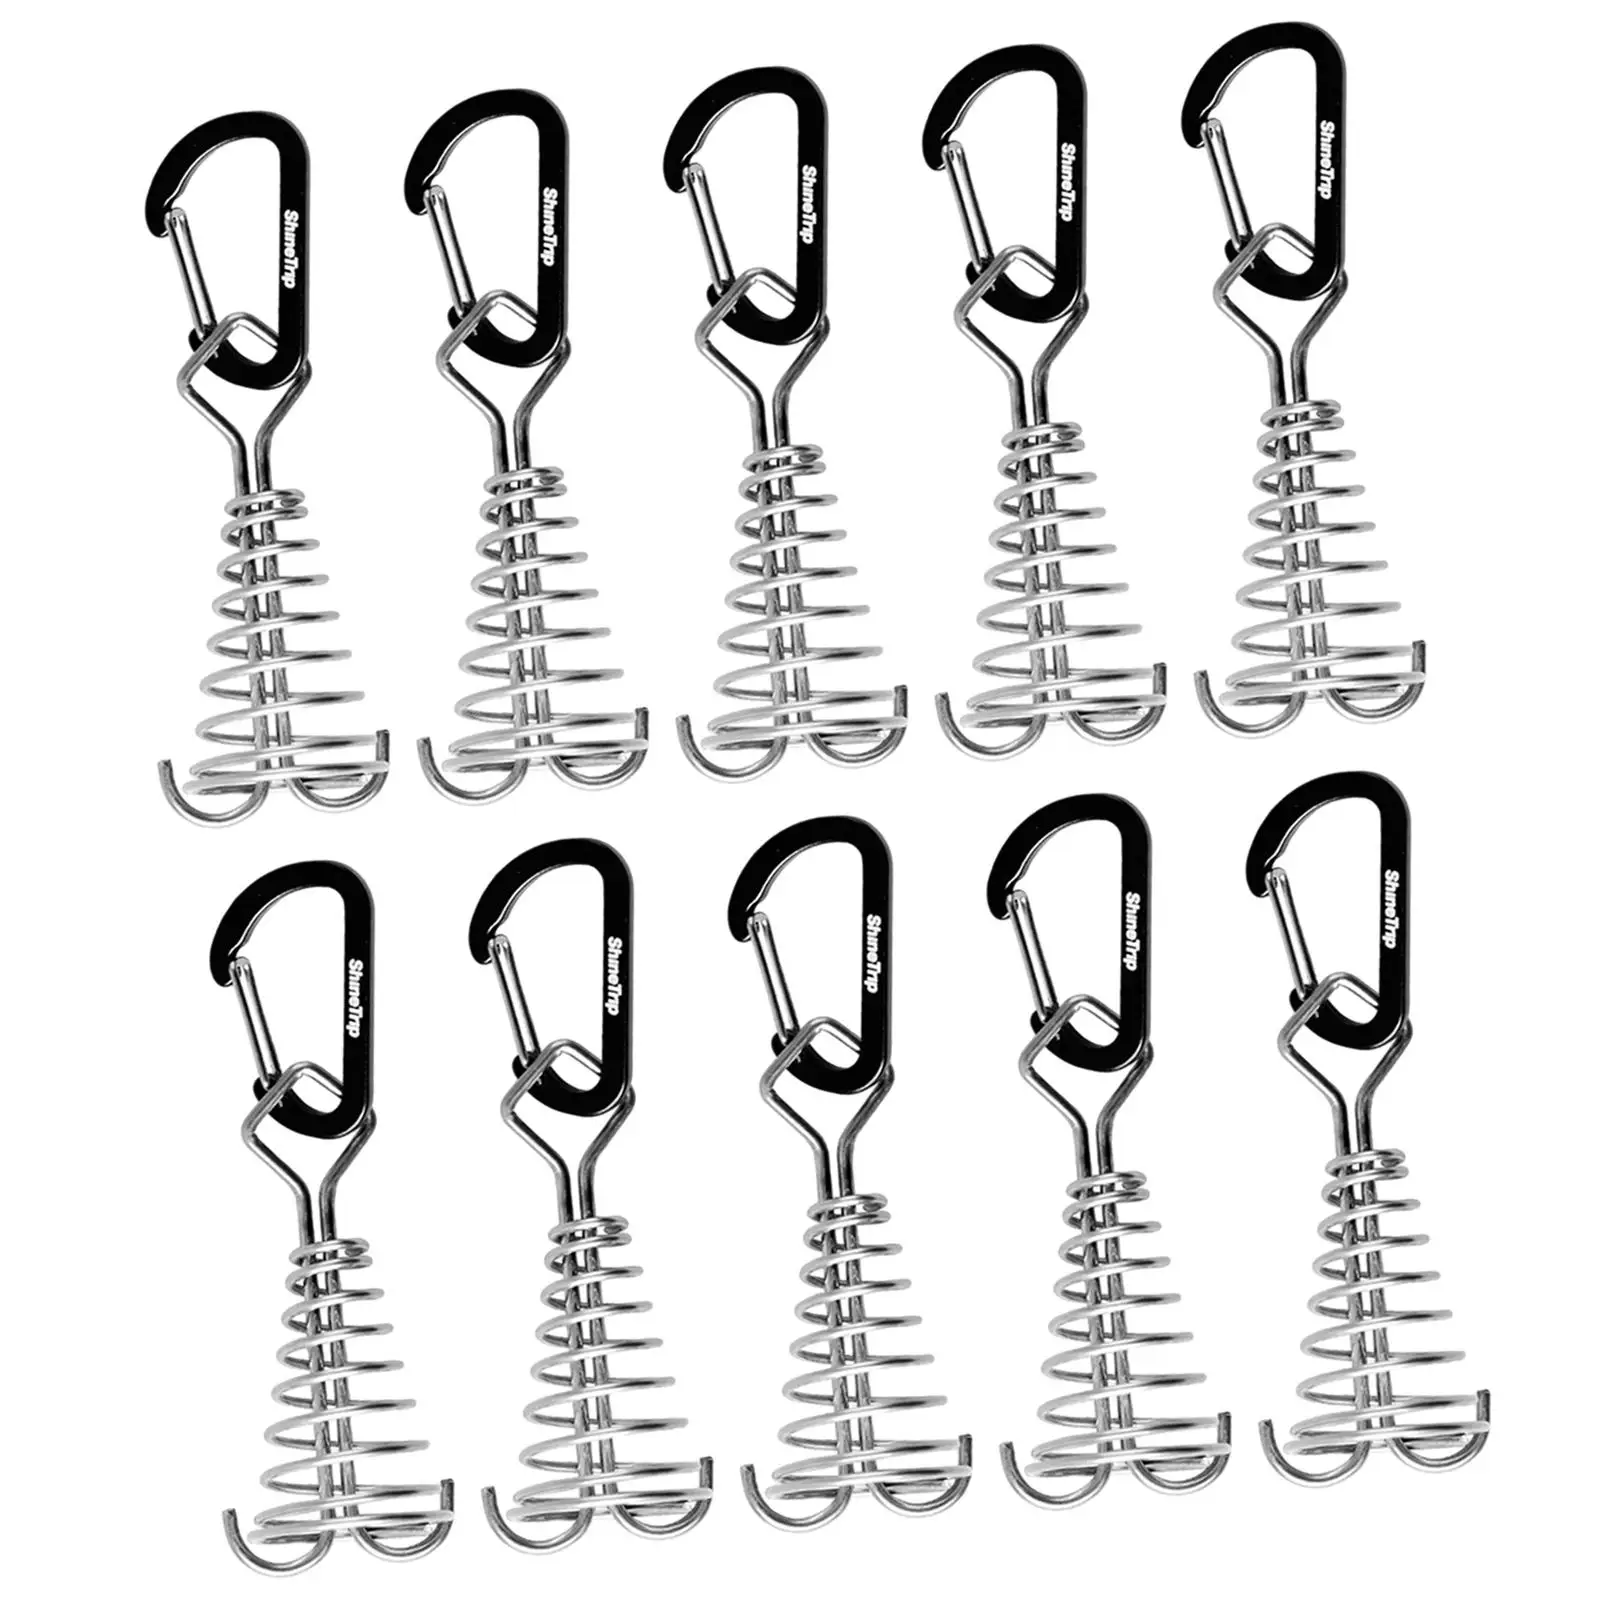 10 Pieces Deck Anchor Pegs Tent Rope Tightener with Spring Buckle for Outdoor